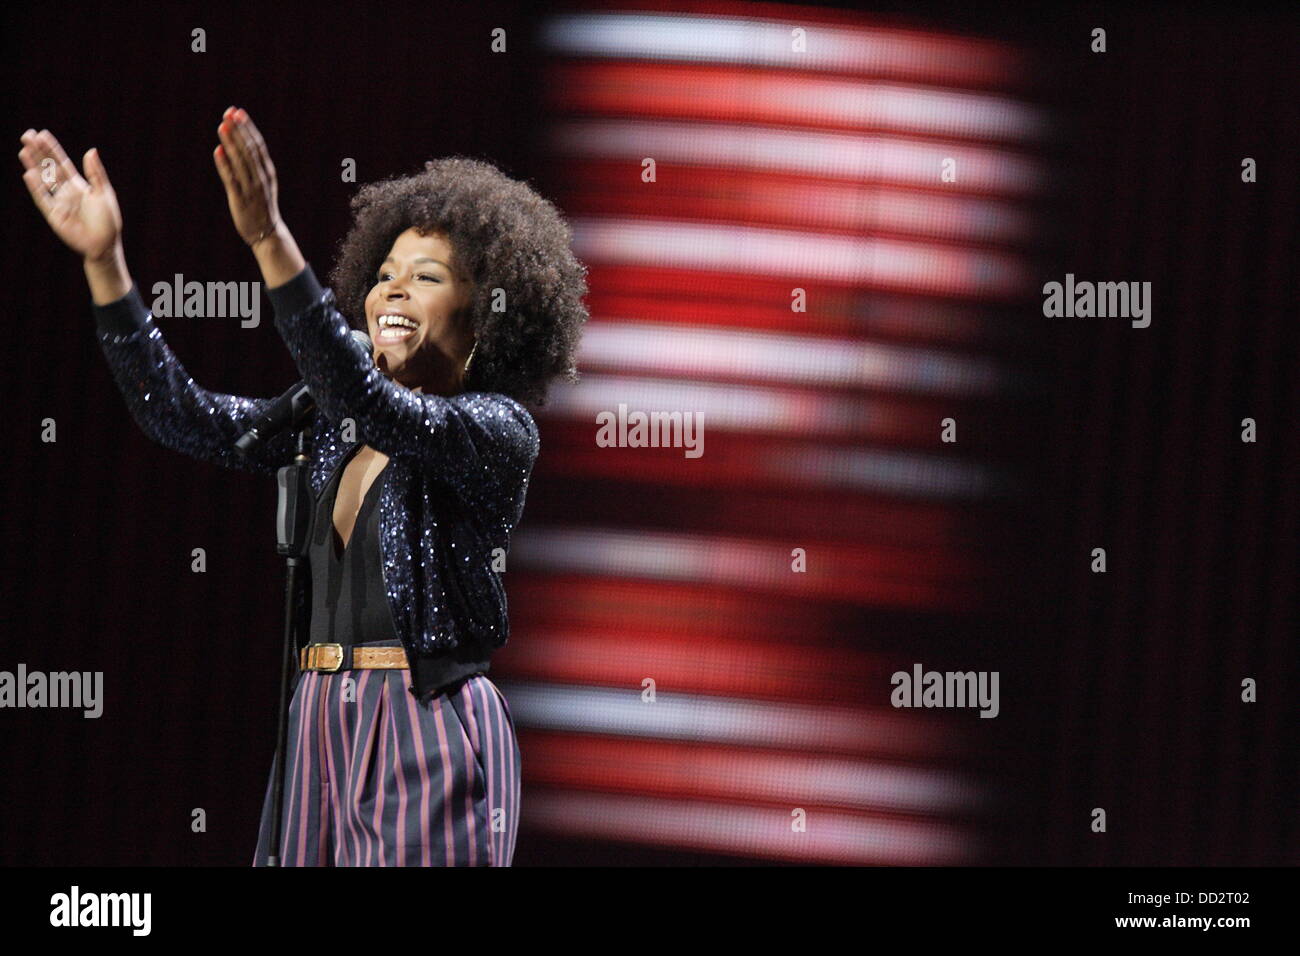 Sopot, Poland 23rd, August Sopot Top of The Top festival in Forest Opera. Pictured:  Danish singer Nabiha performs live on the stage Credit:  Michal Fludra/Alamy Live News Stock Photo